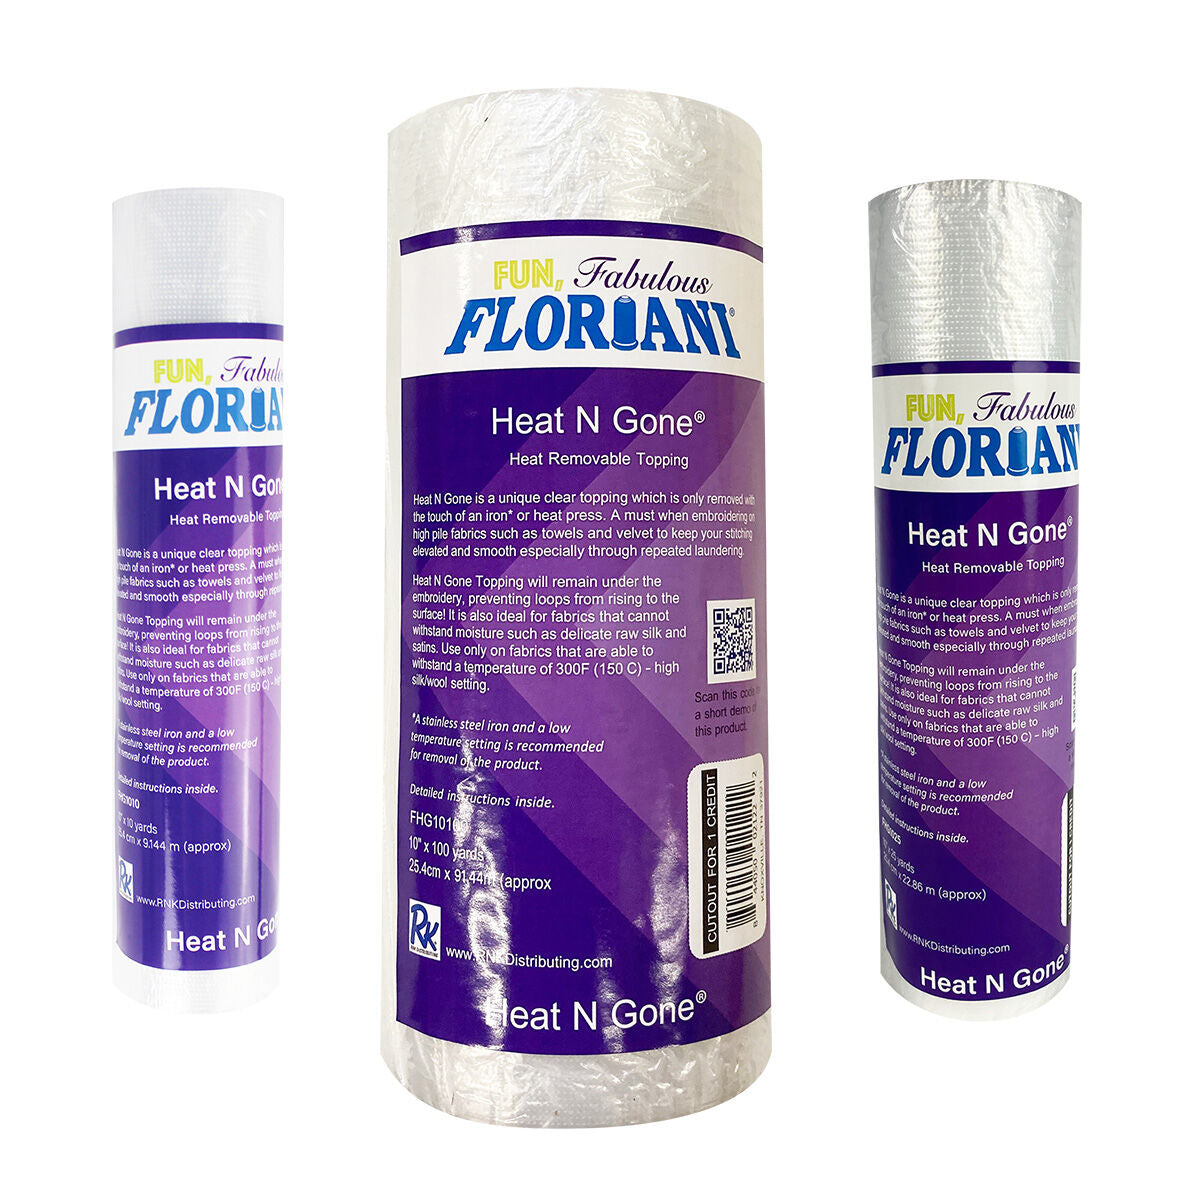 Floriani Stabilizer Heat N Gone Topping,Floriani Stabilizer Heat N Gone Topping,Floriani Stabilizer Heat N Gone Topping 20" x 10yds,Floriani Stabilizer Heat N Gone Topping 10" x 25yds,Floriani Stabilizer Heat N Gone Topping 10" x 100yds